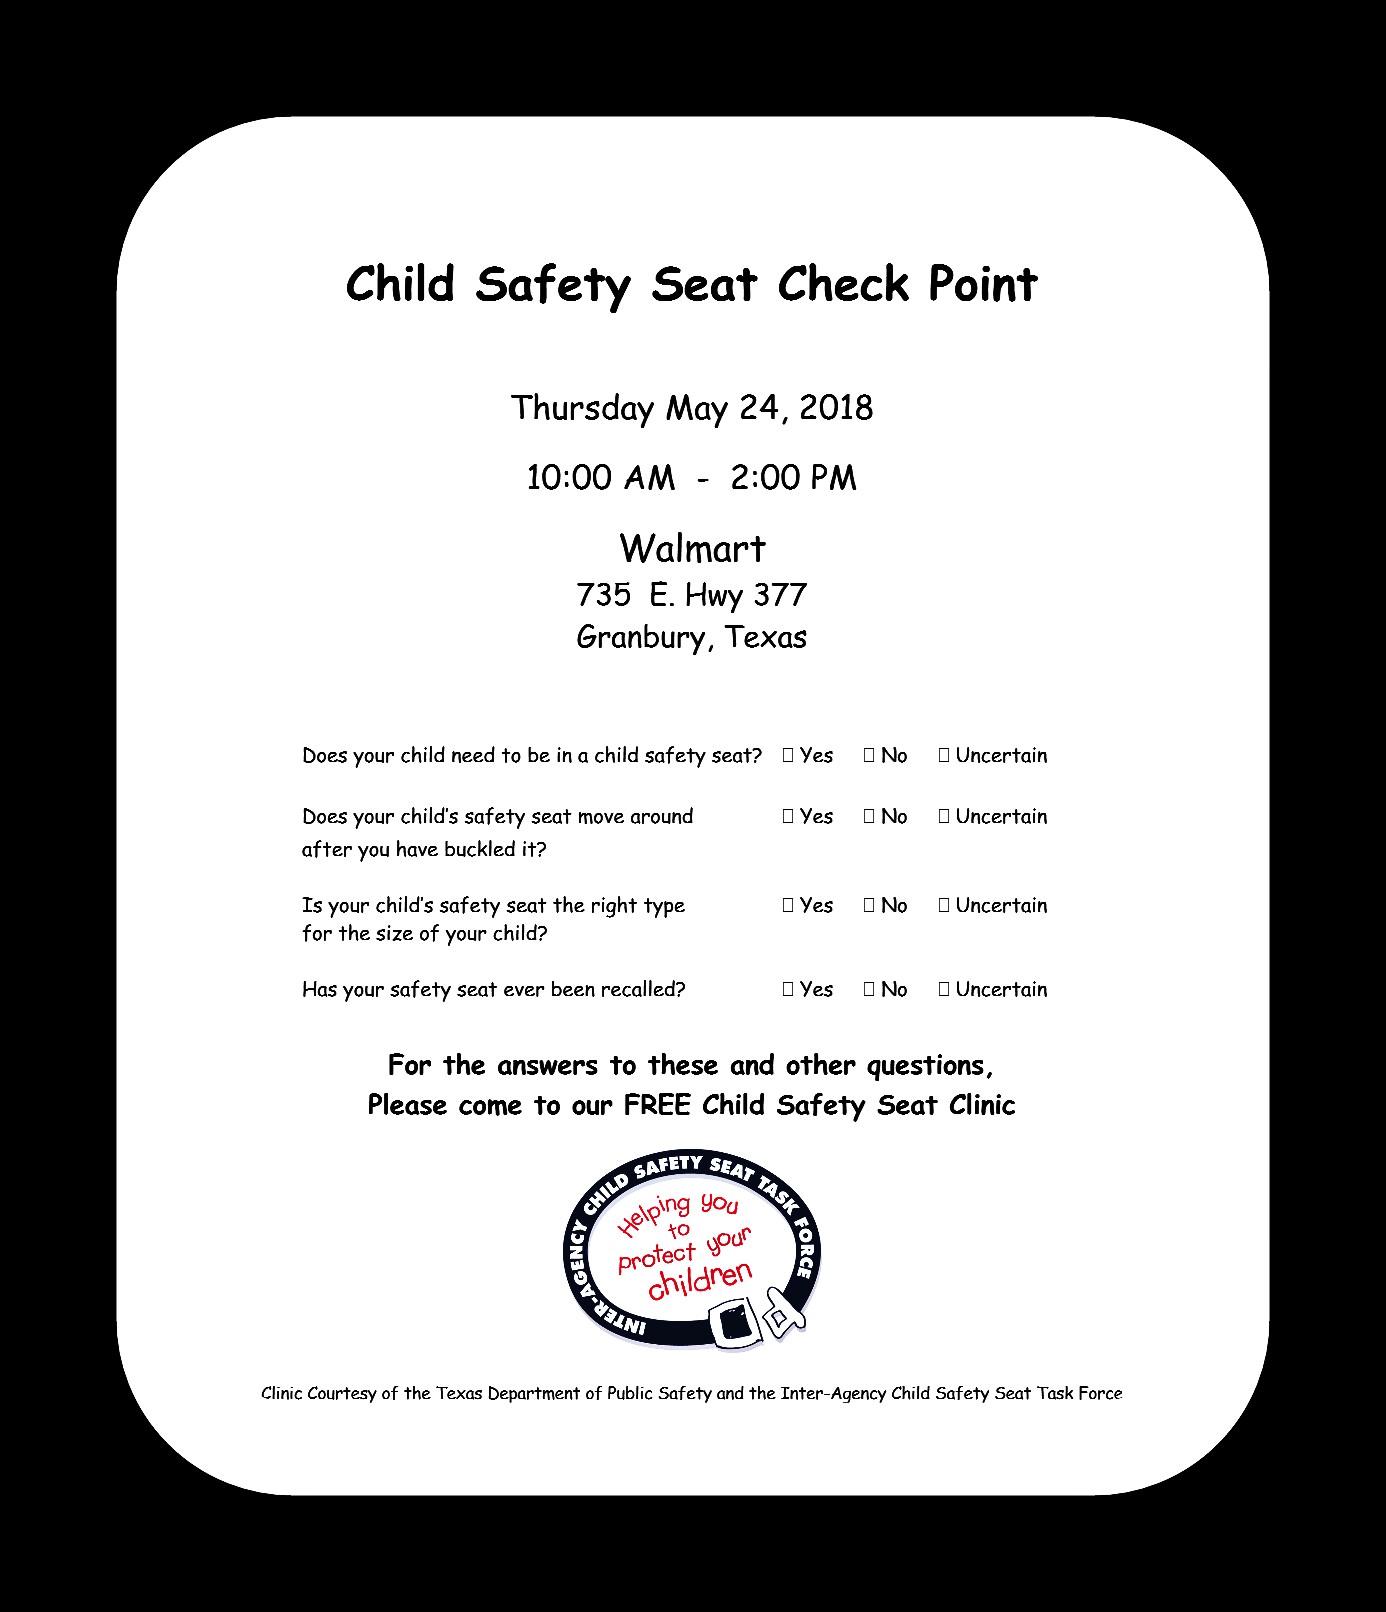 FREE Child Safety Seat Clinic Coming Soon